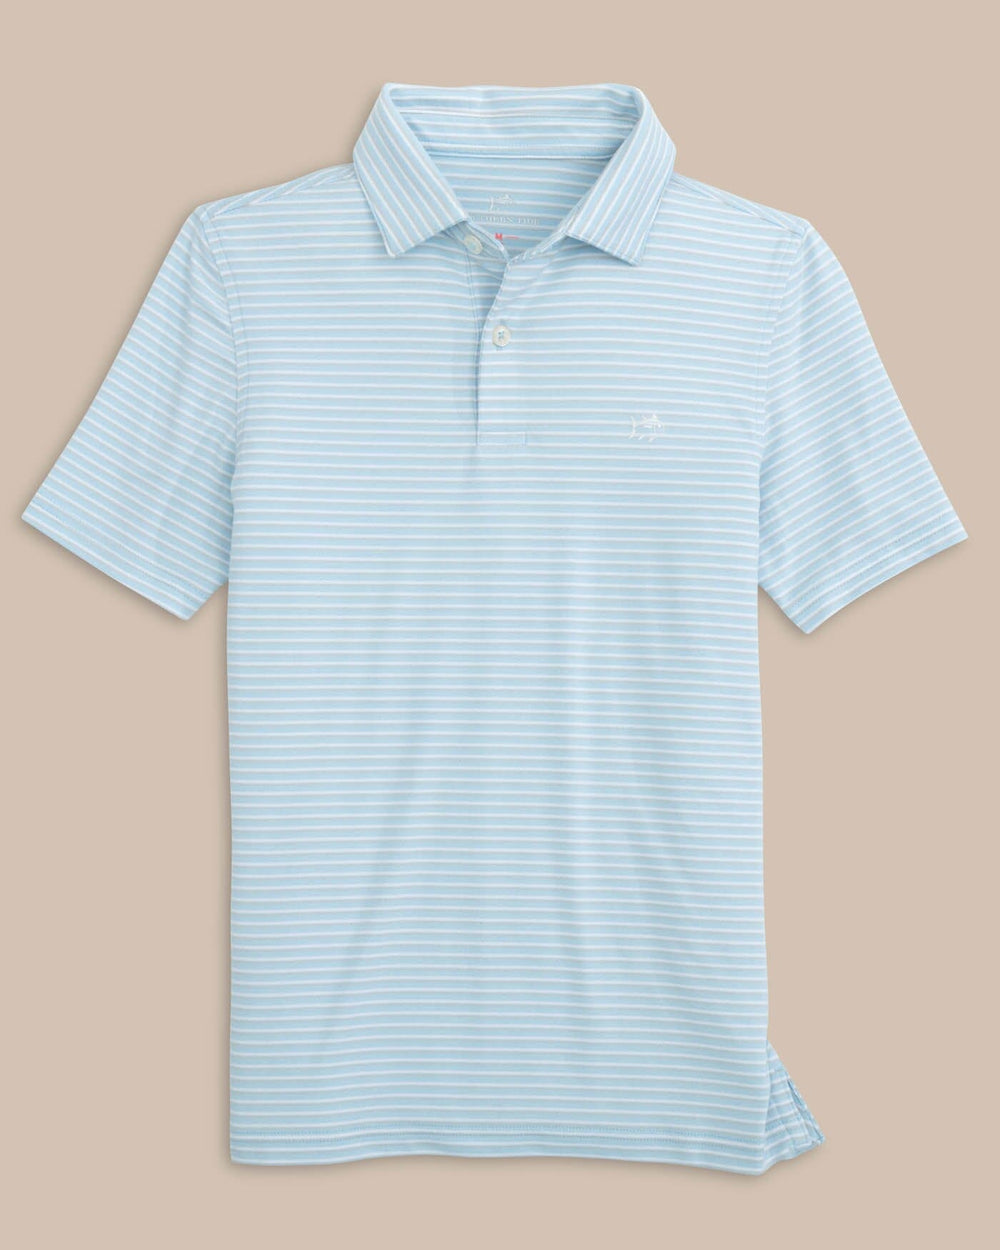 The front view of the Southern Tide Kids Ryder Heather Halls Stripe Performance Polo by Southern Tide - Heather Clearwater Blue